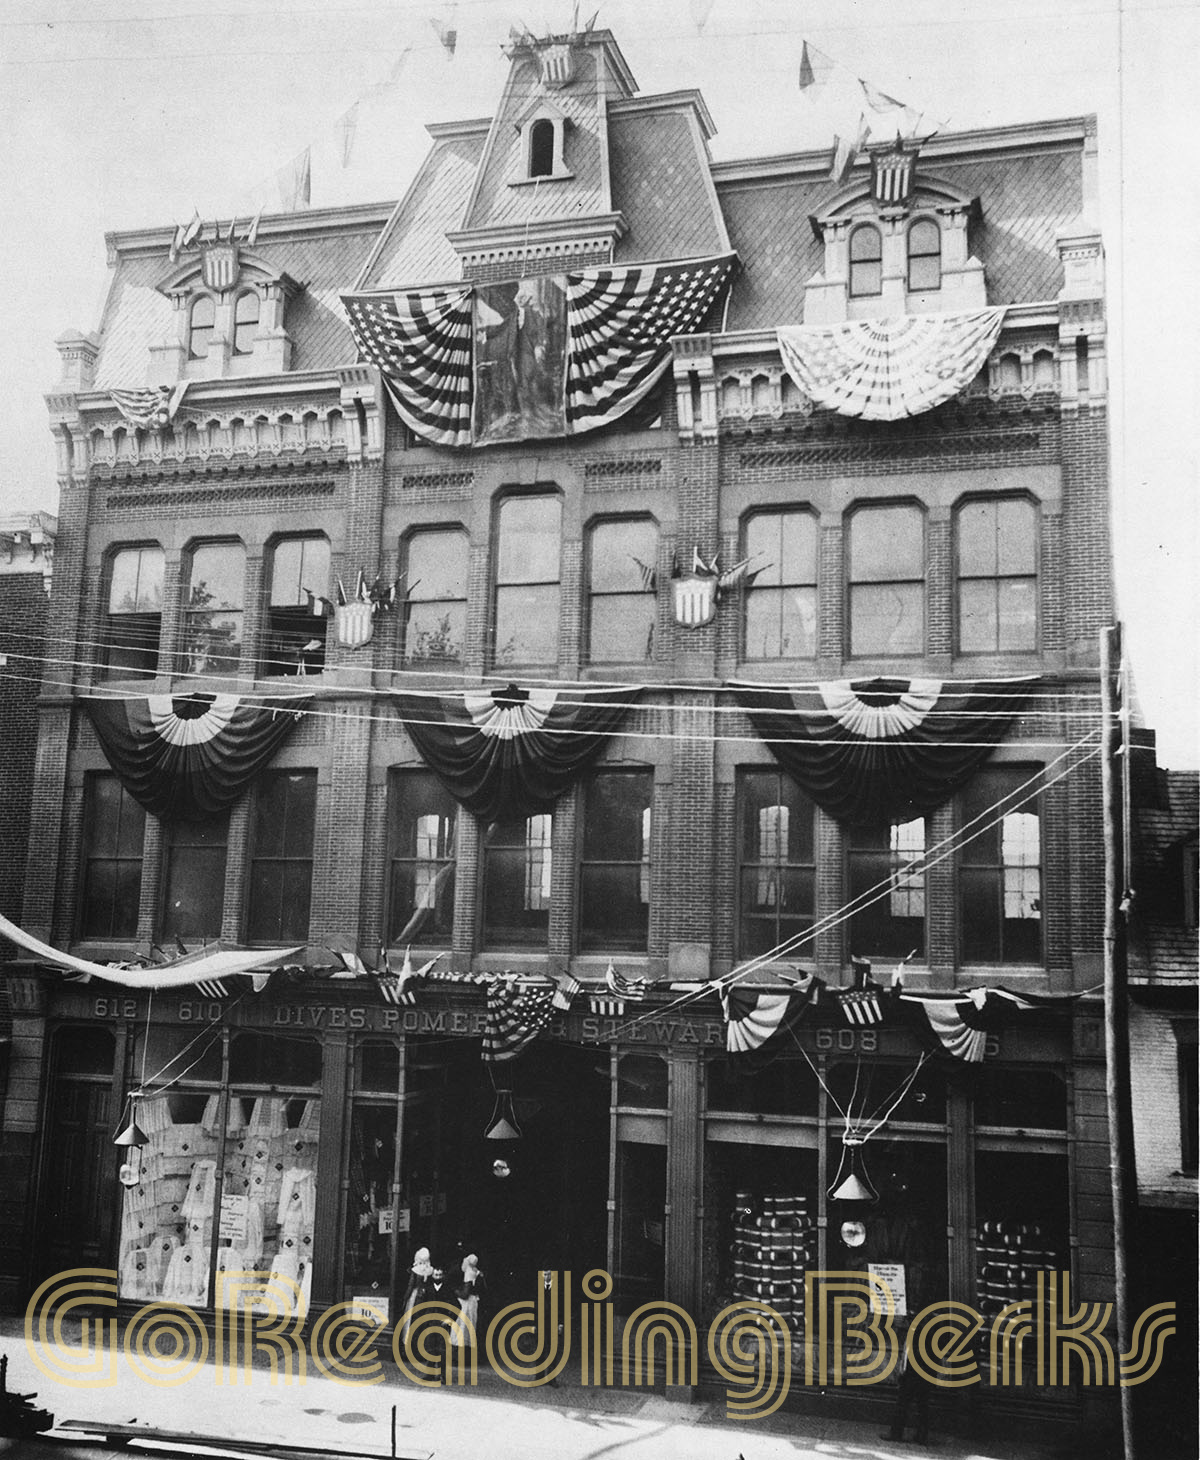 Pomeroy's Department Store, Reading, PA, 1883-1884